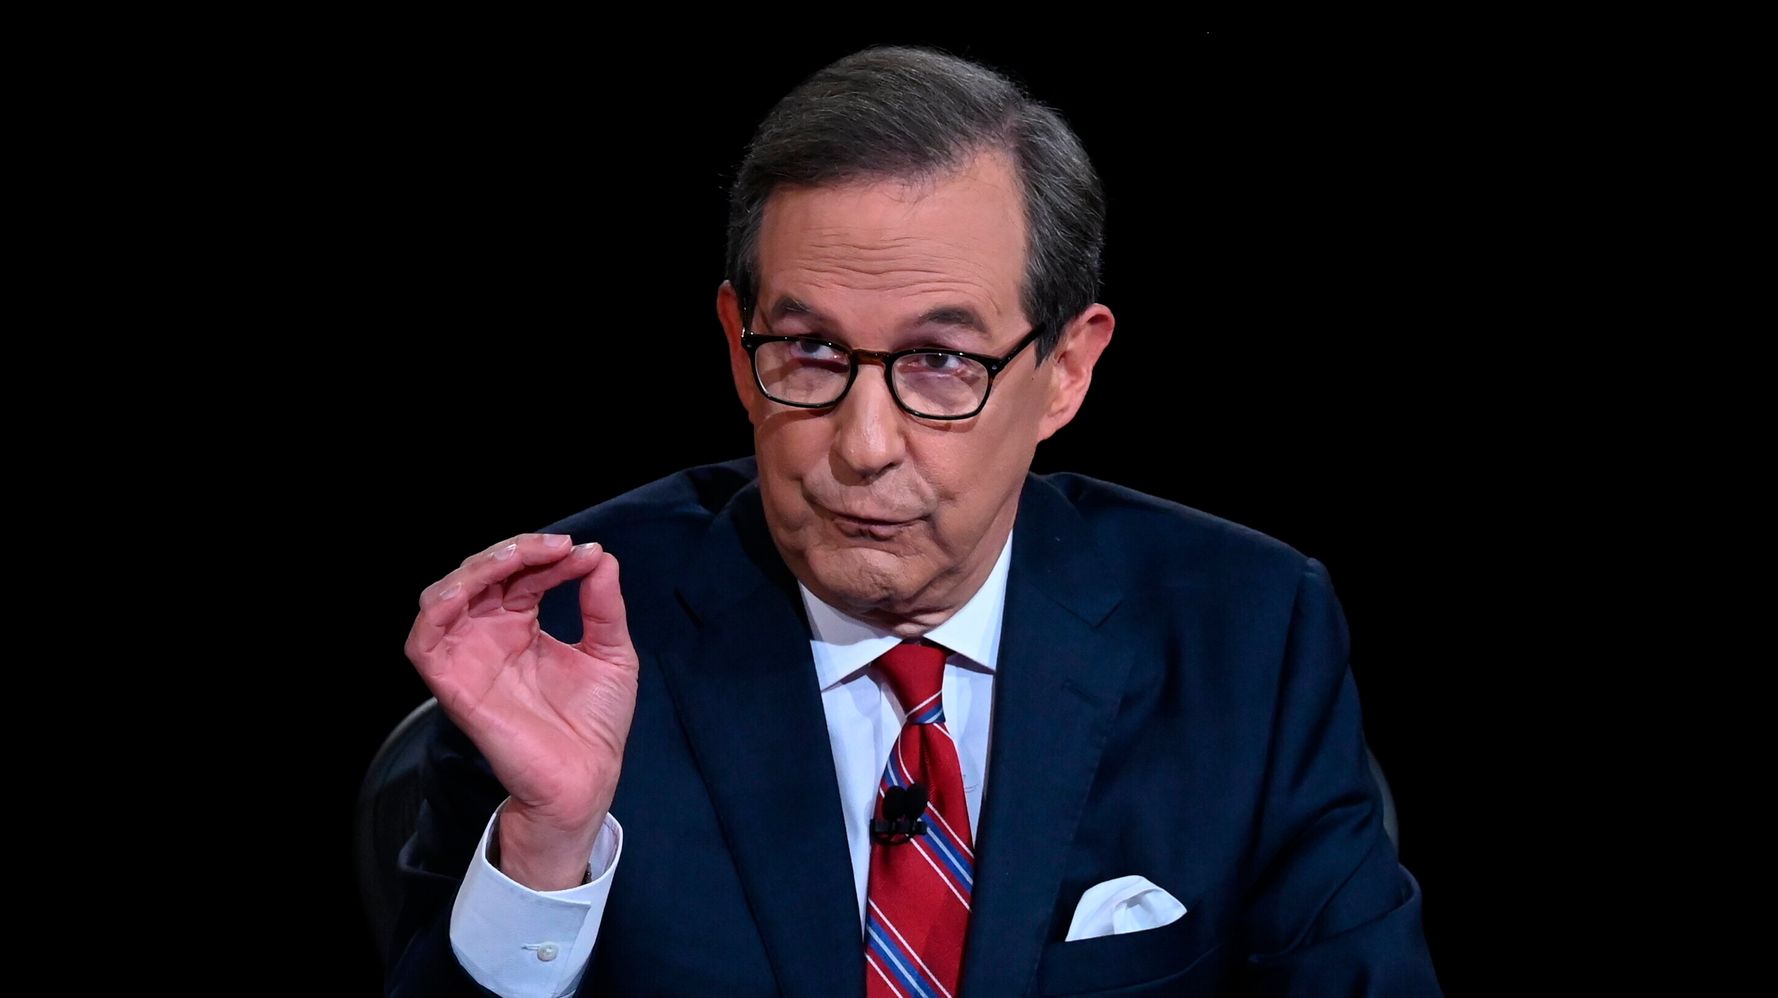 Chris Wallace: What Got Him 'Pissed Off' About The First Debate